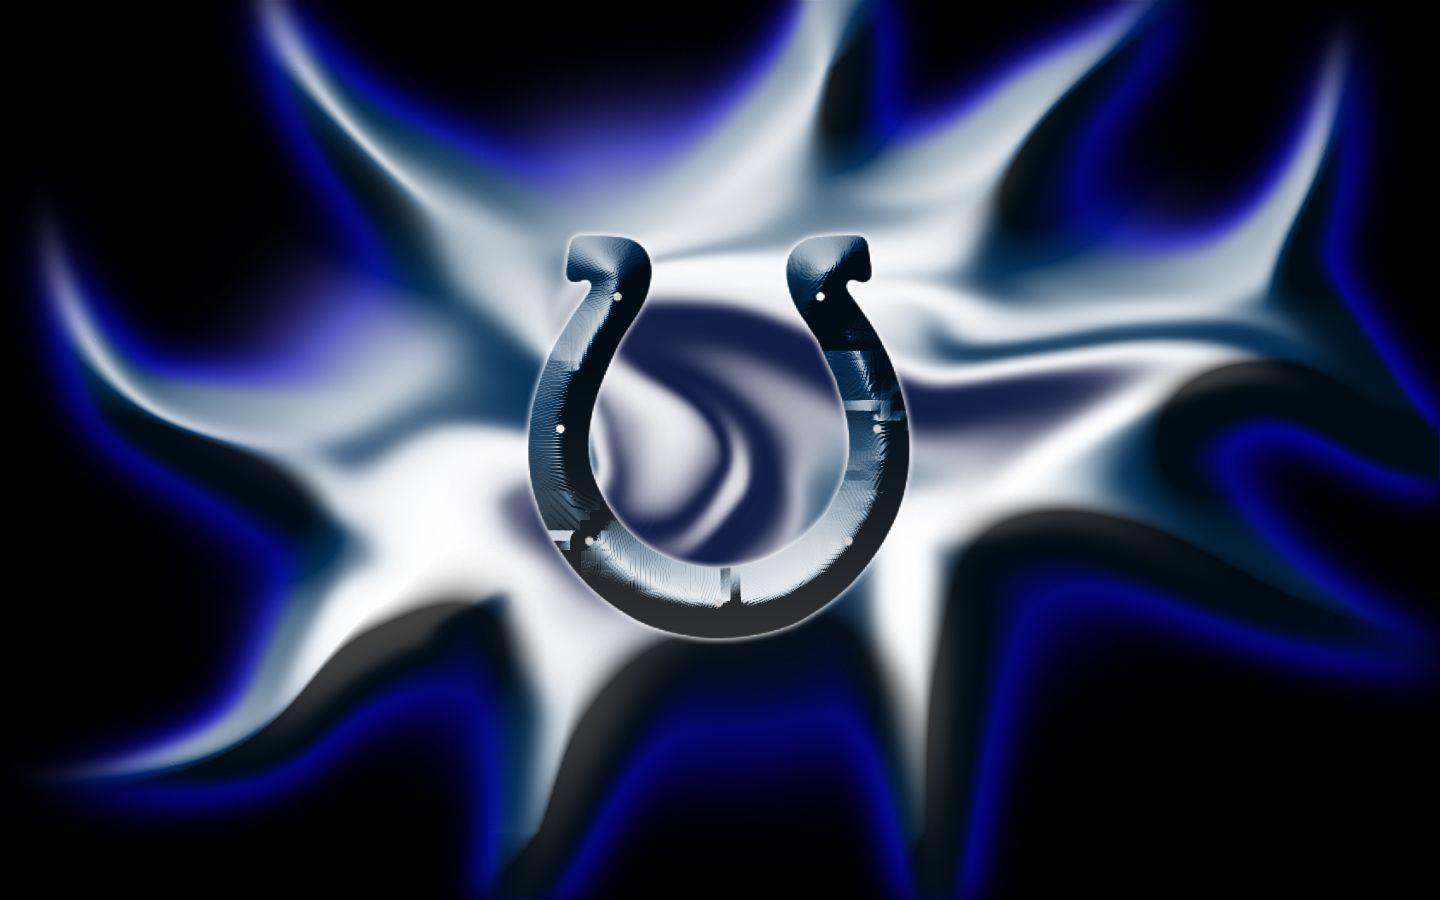 Indianapolis Colts Background. Indianapolis Colts wallpaper